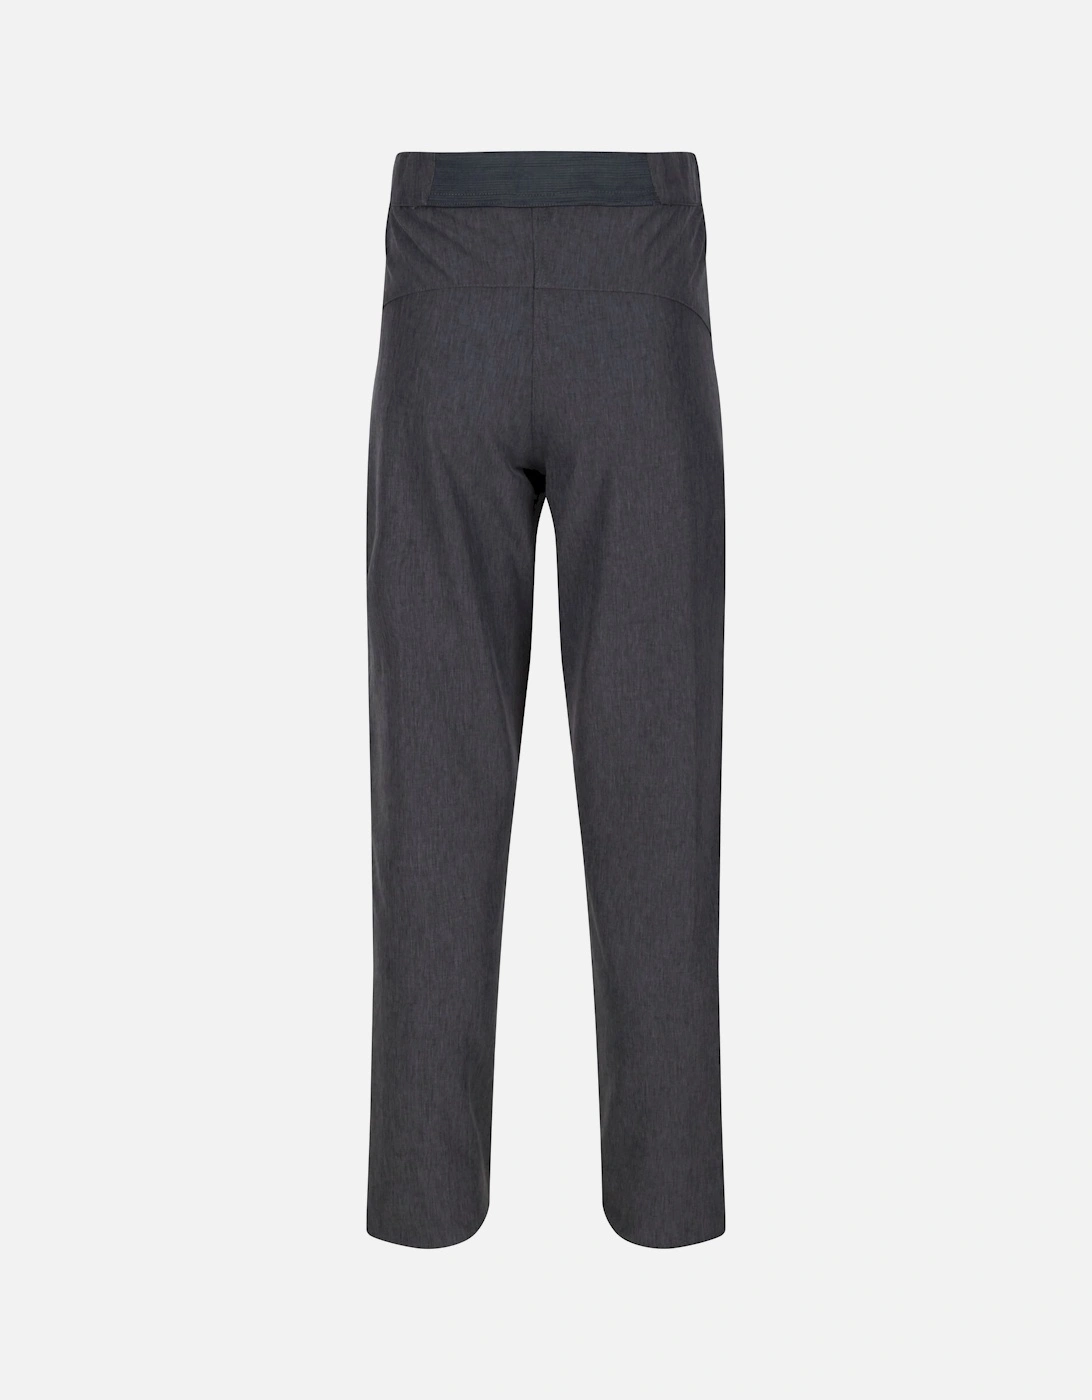 Childrens/Kids Pentre Marl Stretch Trousers